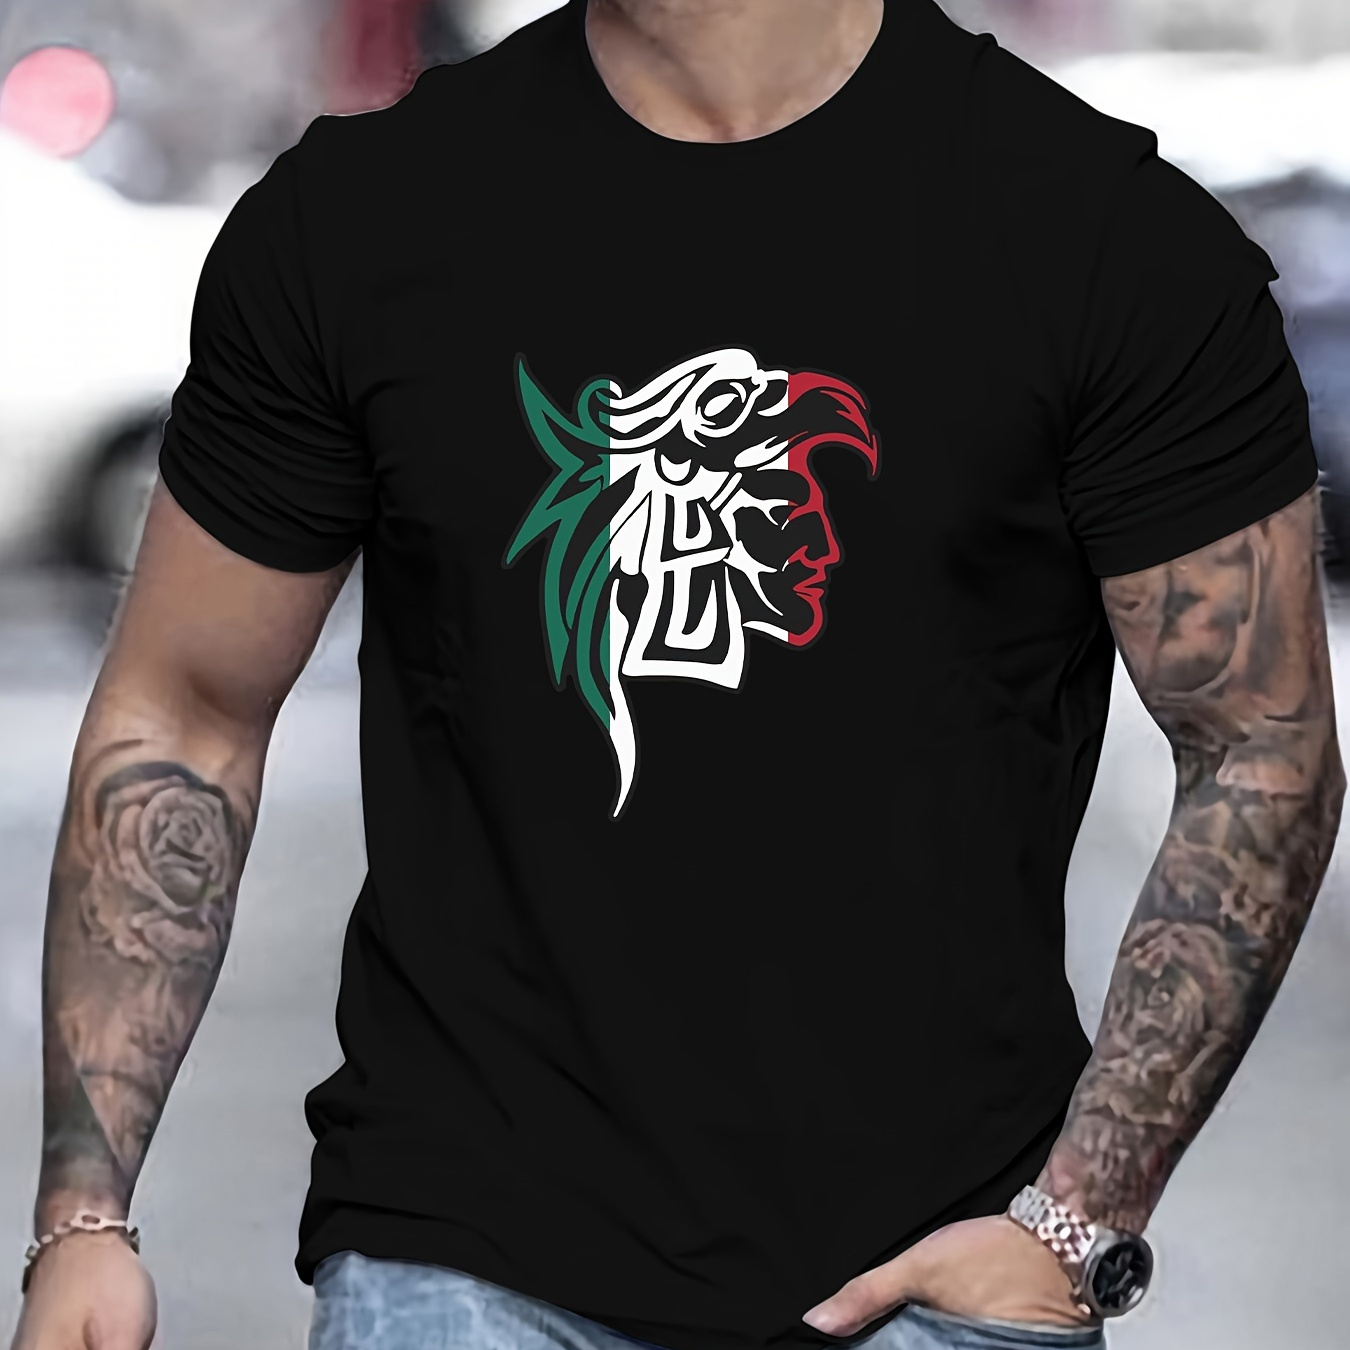 

Mexico Theme Print Tee Shirt, Tees For Men, Casual Short Sleeve T-shirt For Summer